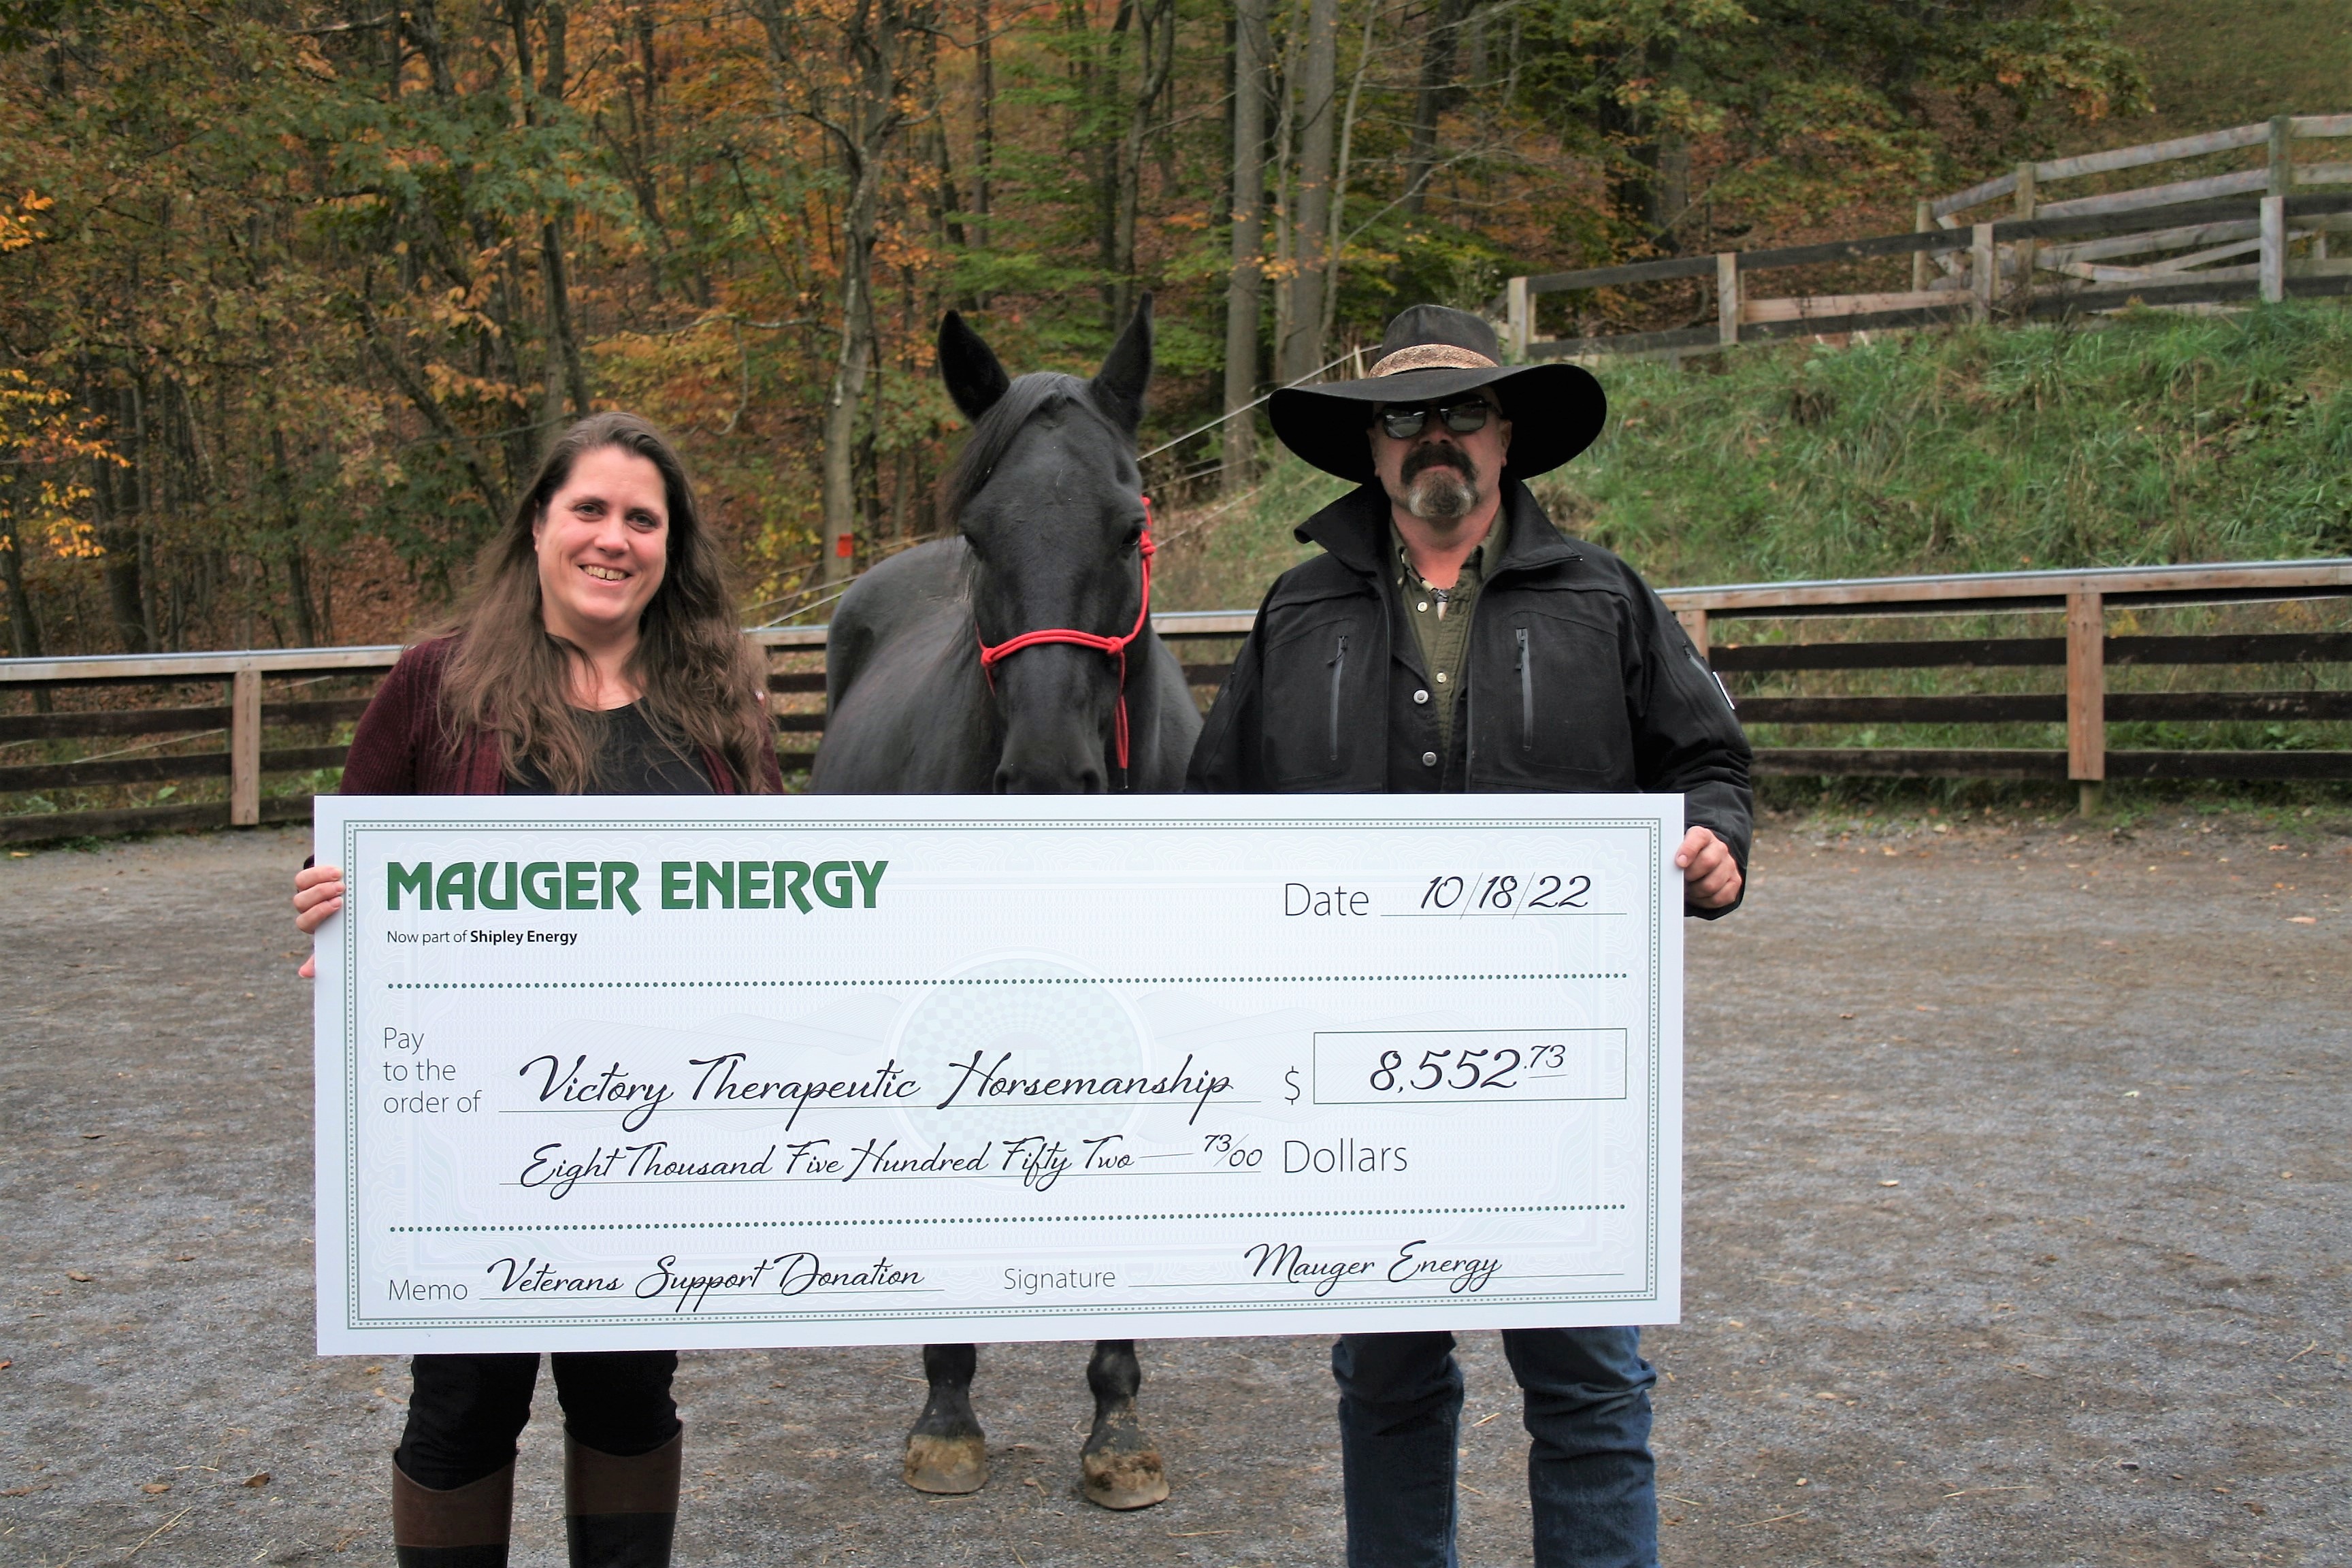 Donation from Mauger Energy to VTH